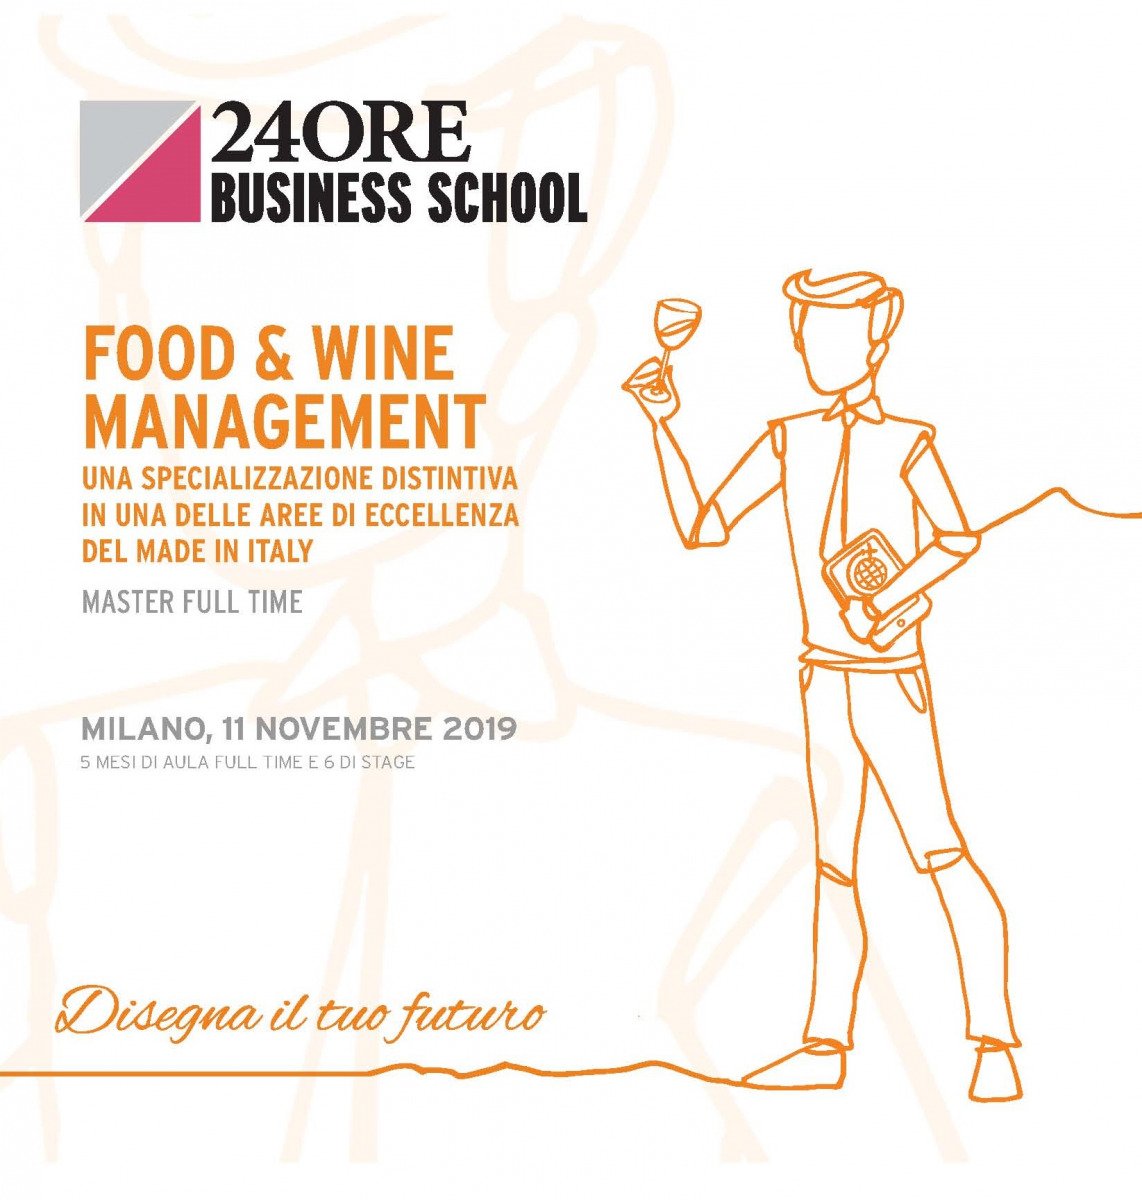 Andrea De Panfilis, Caterina Giacalone and Alberto Passera lecturers at the "Food & Wine Management" Master organized by 24Ore Business School